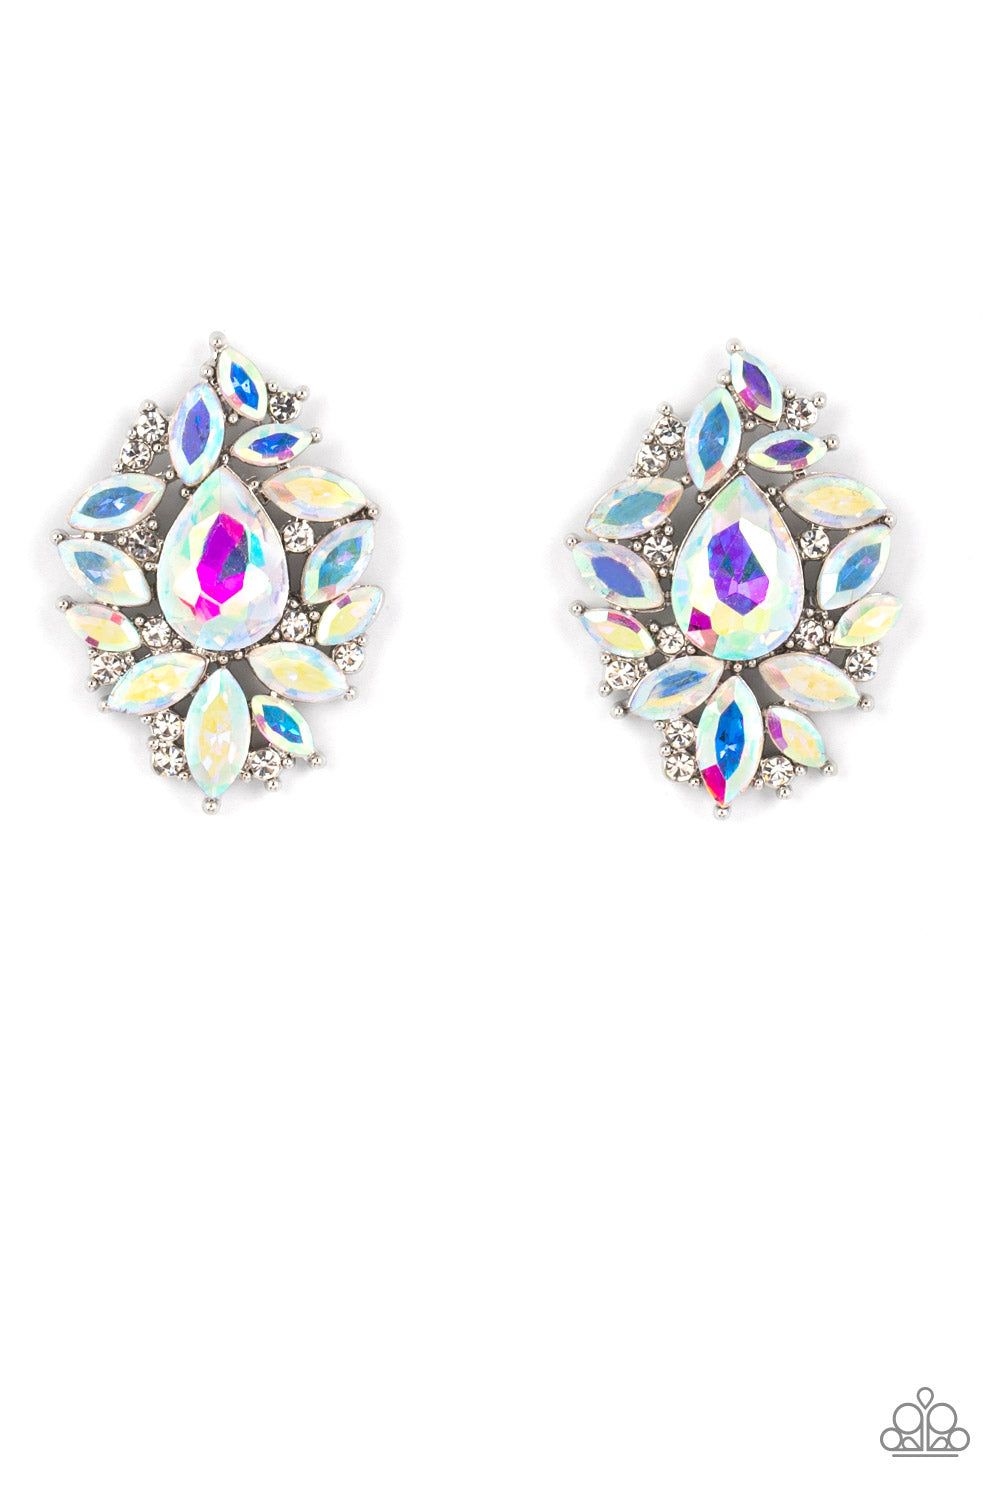 We All Scream for Ice QUEEN - Multi Earring